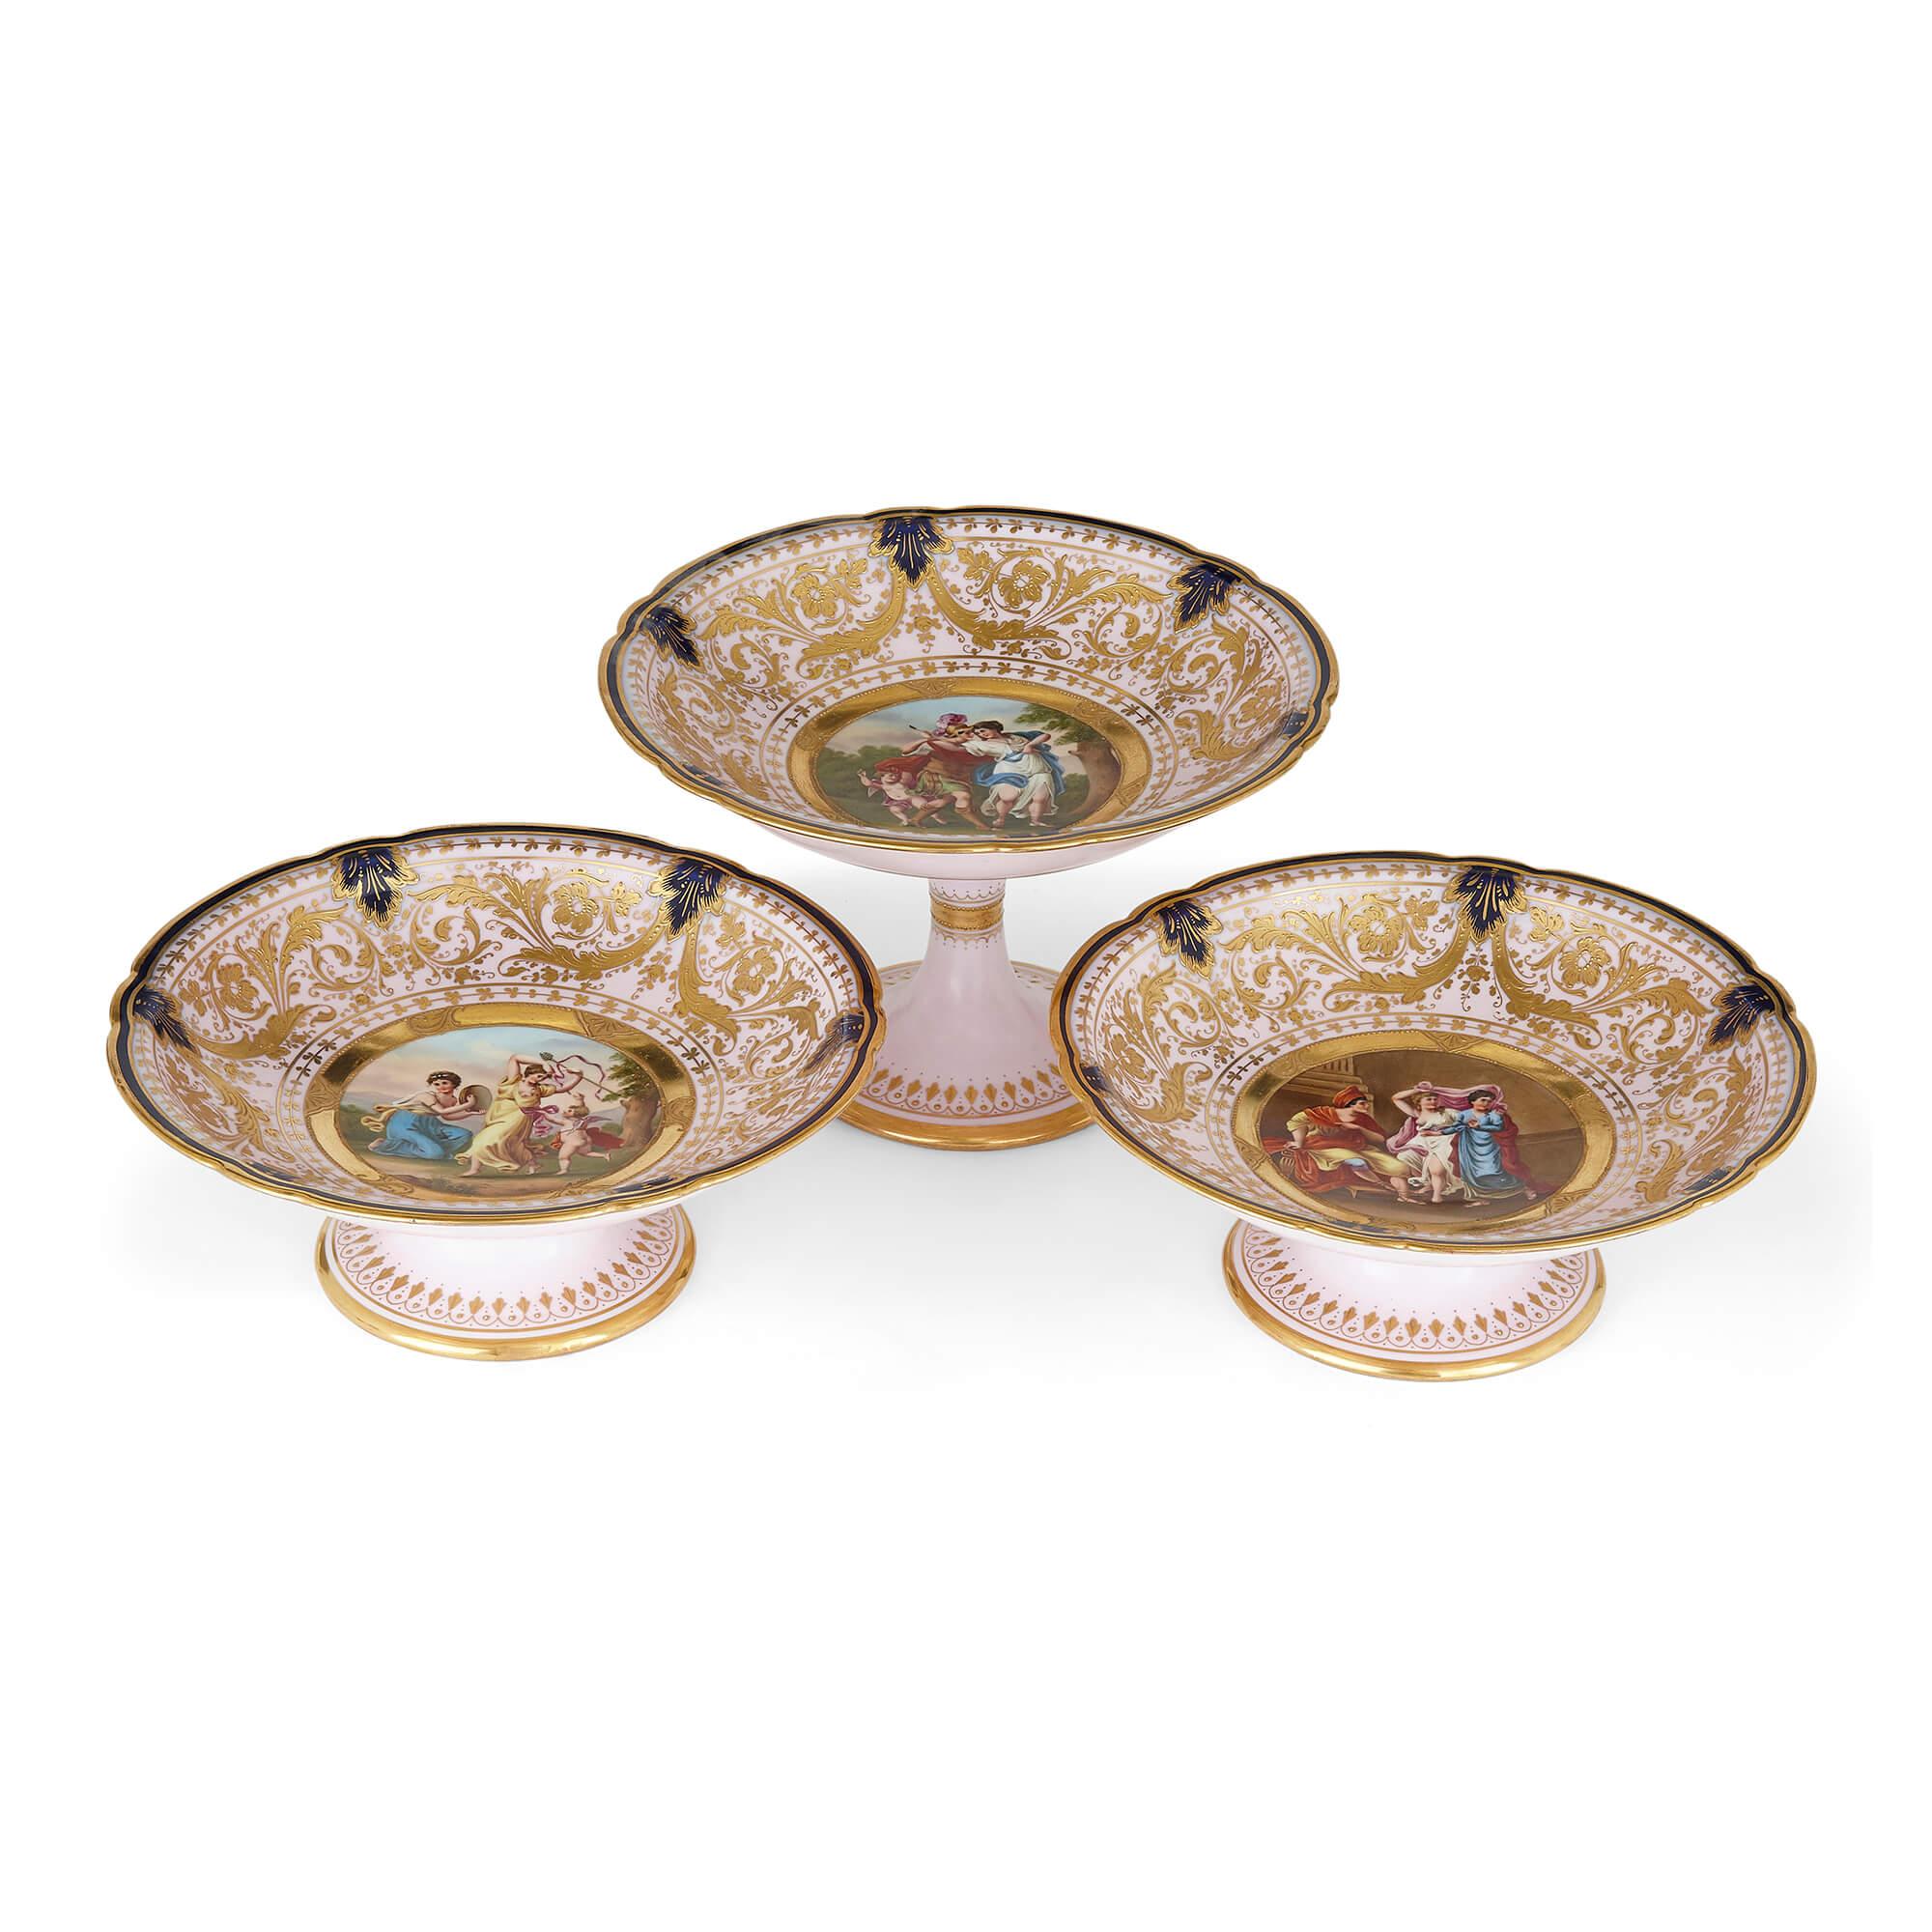 Set of three porcelain tazze by Royal Vienna
Austrian, early 20th century
Larger tazza: Height 15cm, diameter 34cm
Smaller tazze: Height 9cm, diameter 34cm

This elegant set of three tazze (a tazza being a plate raised on a socle) is by Royal